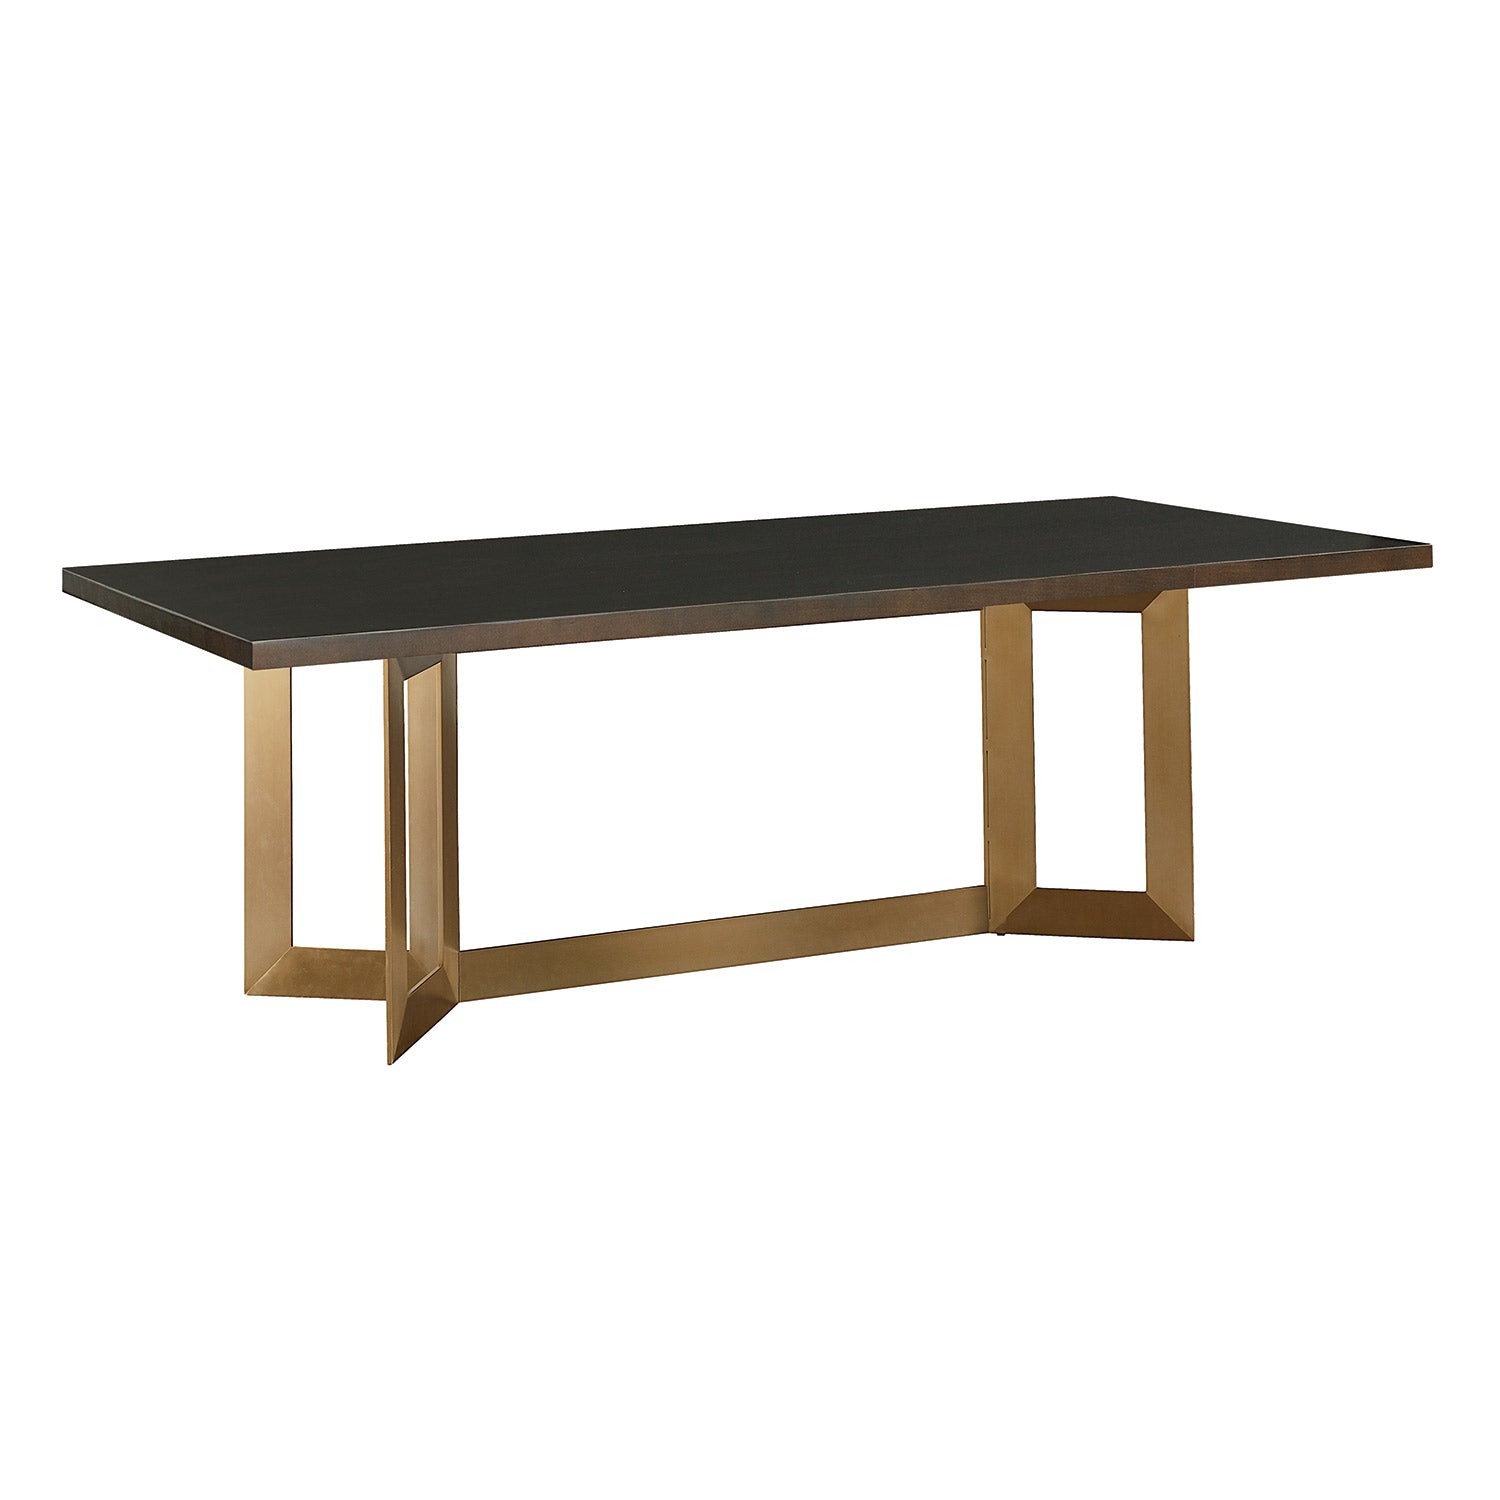 Astor Solid Maple Live Edge Dining Table